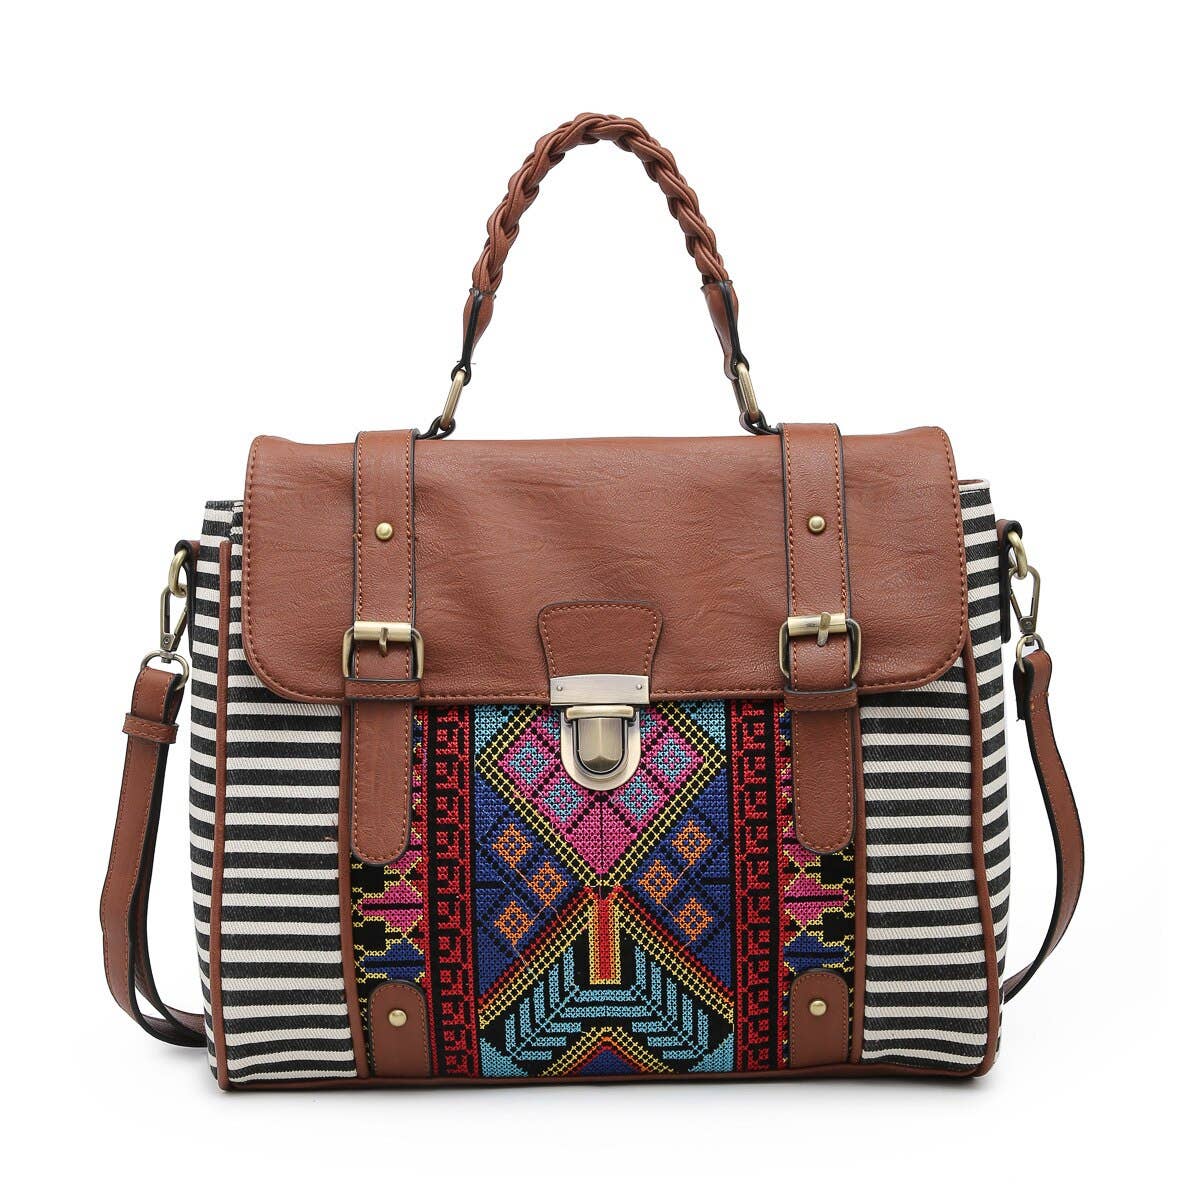 Aztec Embroidered Satchel w/ Braided Handle